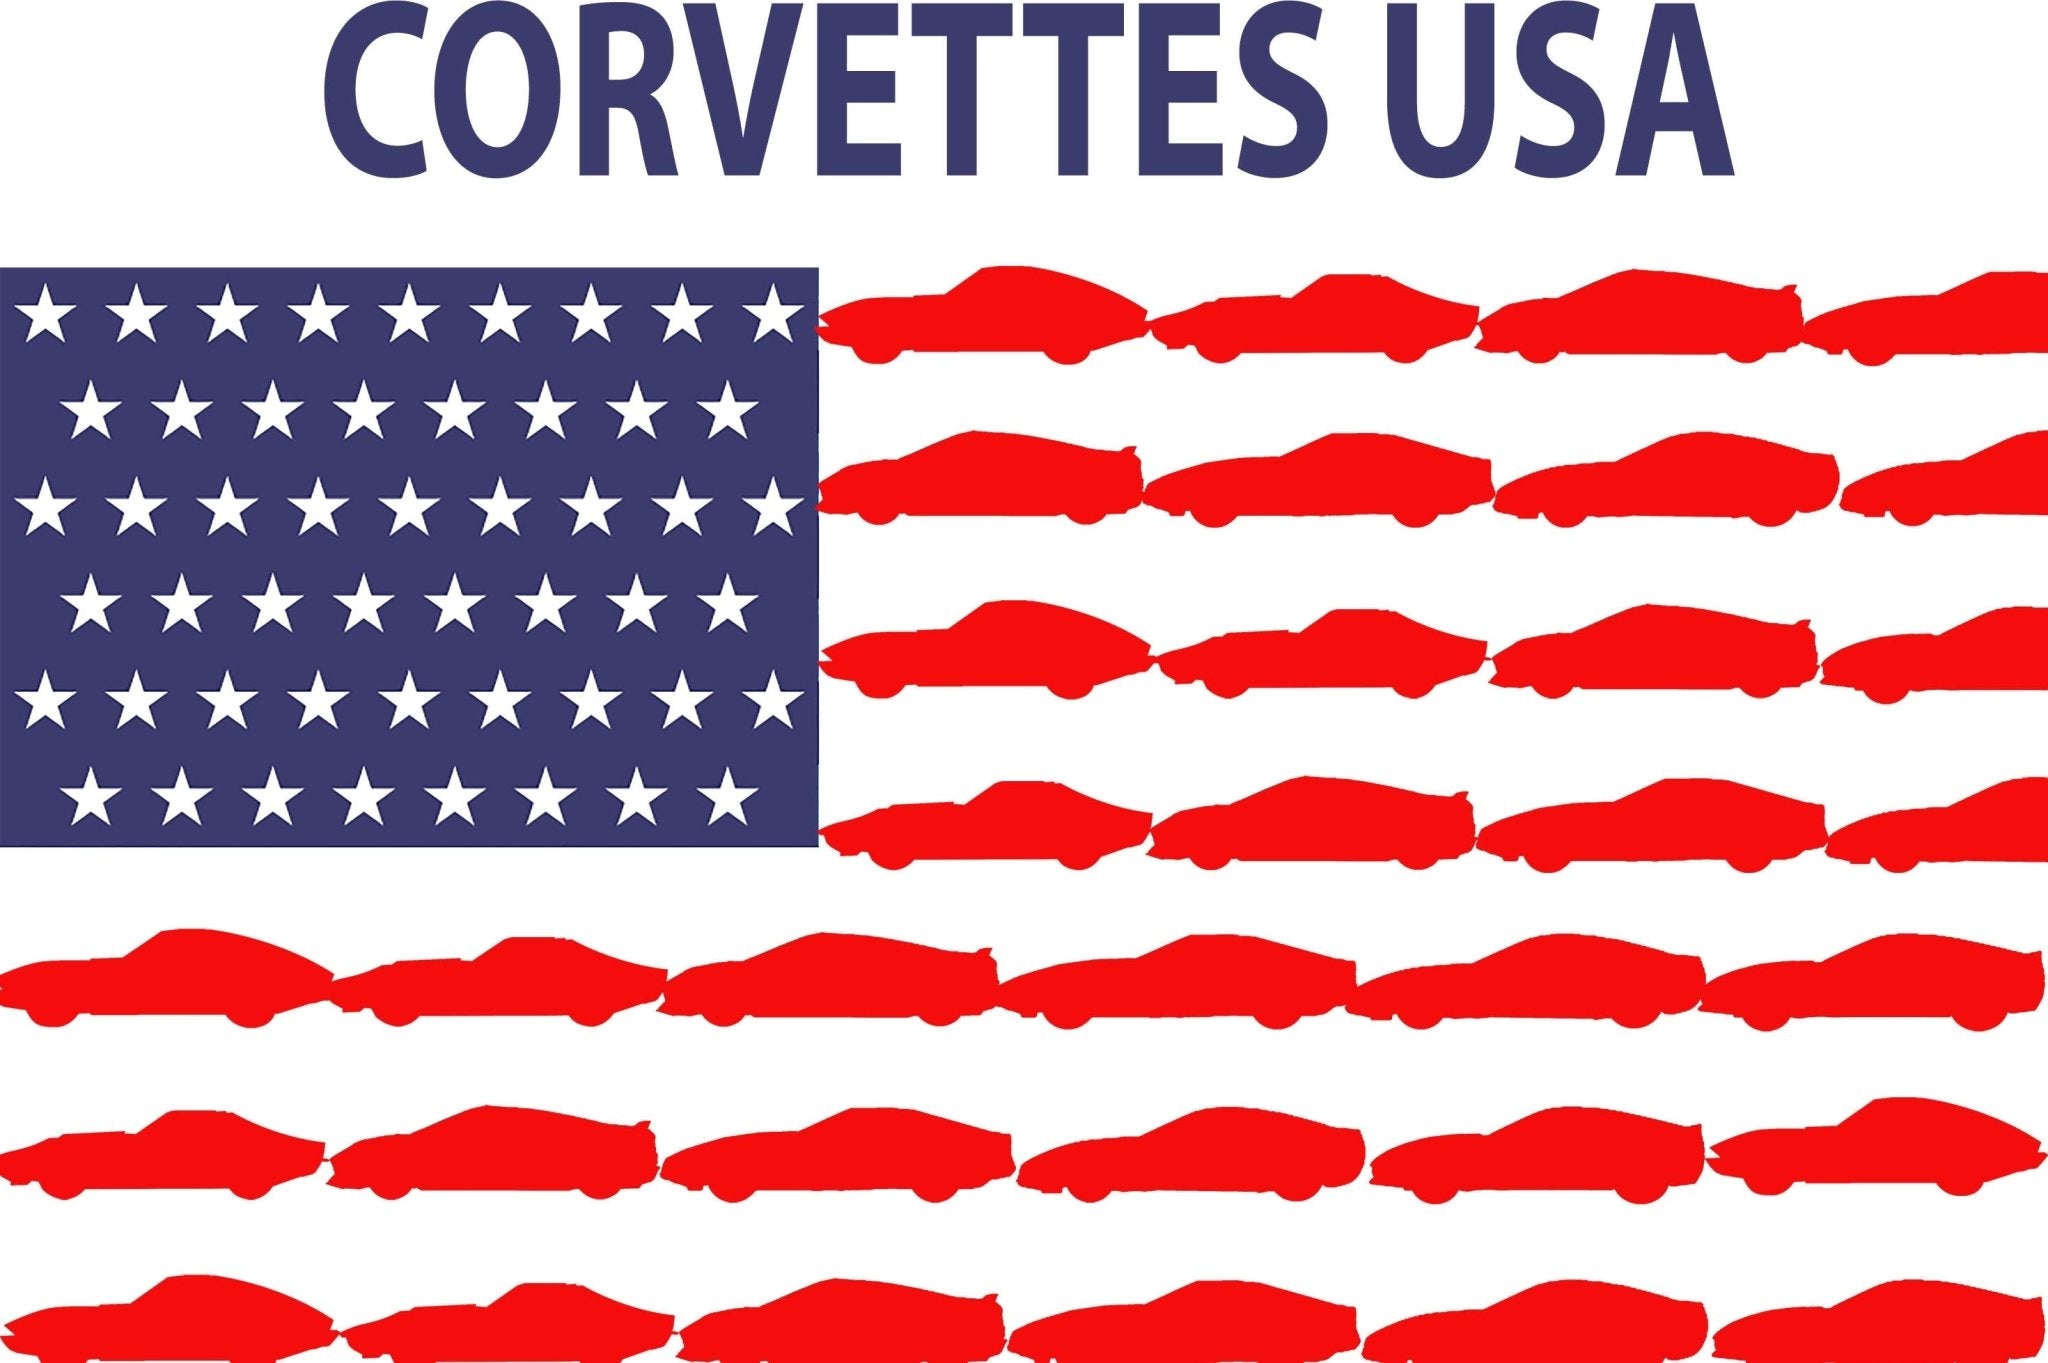 Corvette USA T-Shirt with Stripes made of Corvette Silhouettes, Image on back, Cool Fathers Day Gift - Vette1 - Misc. Men's T-Shirts